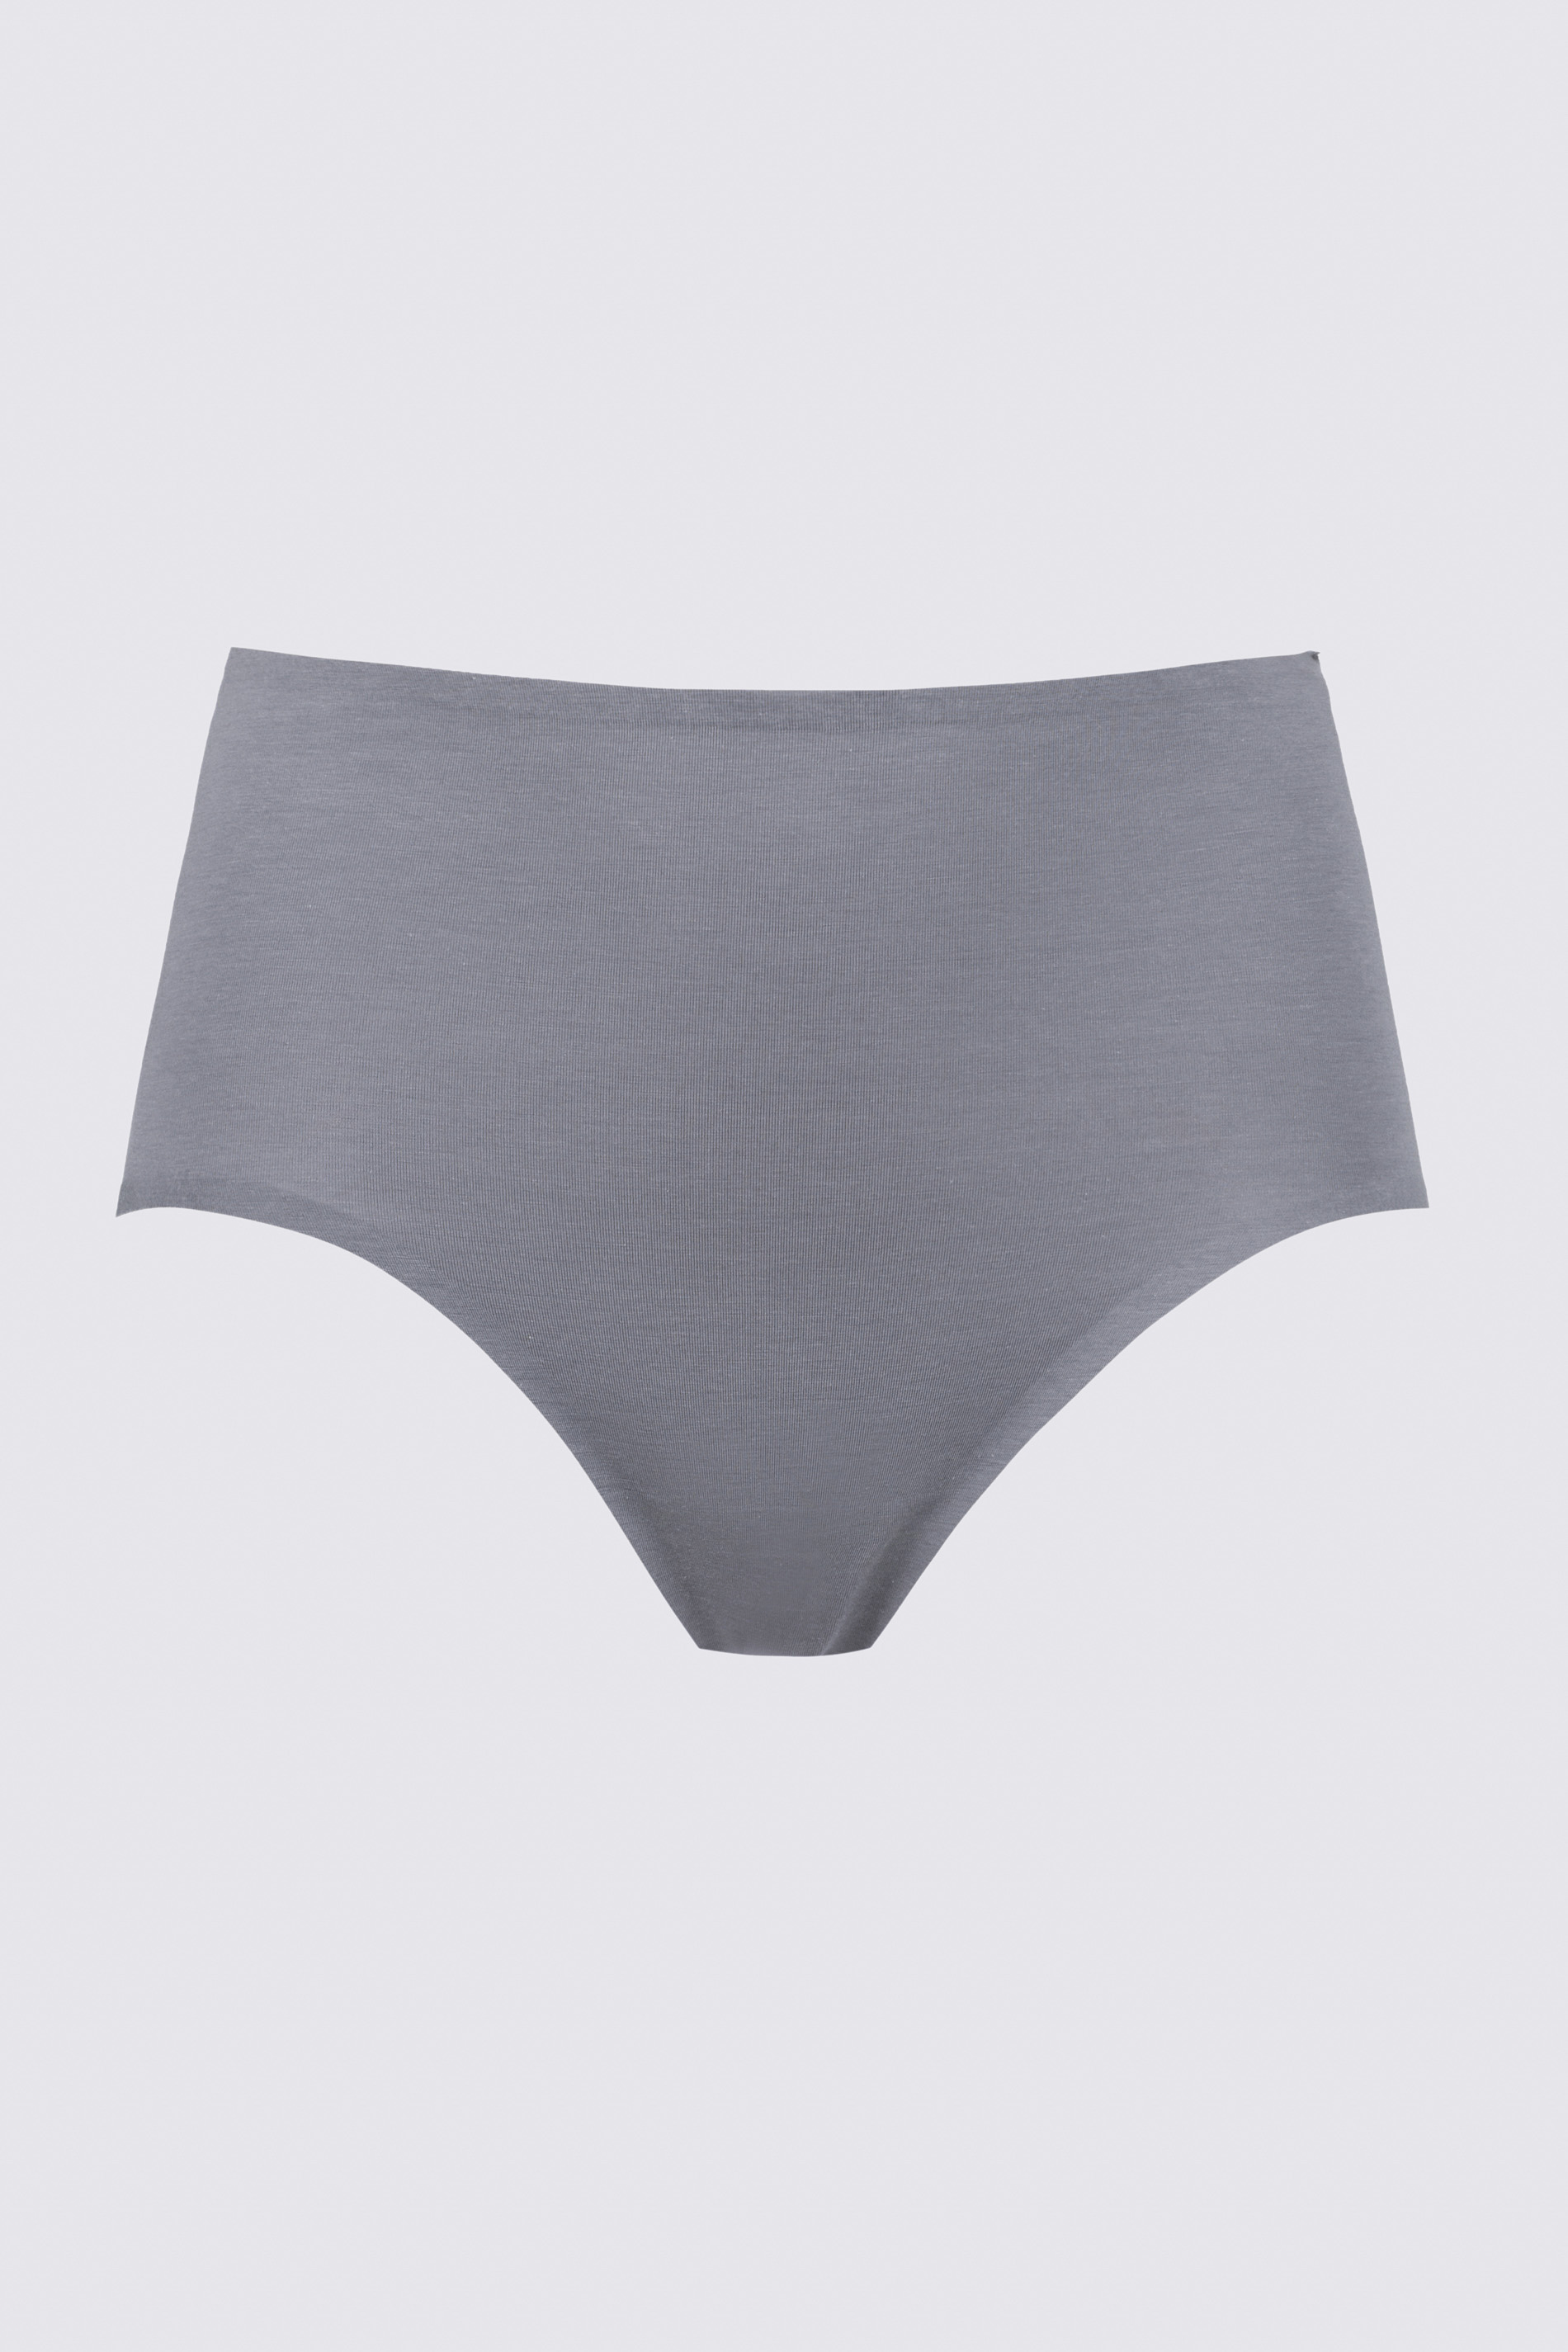 Tailleslip Lovely Grey Serie Pure Second me Uitknippen | mey®